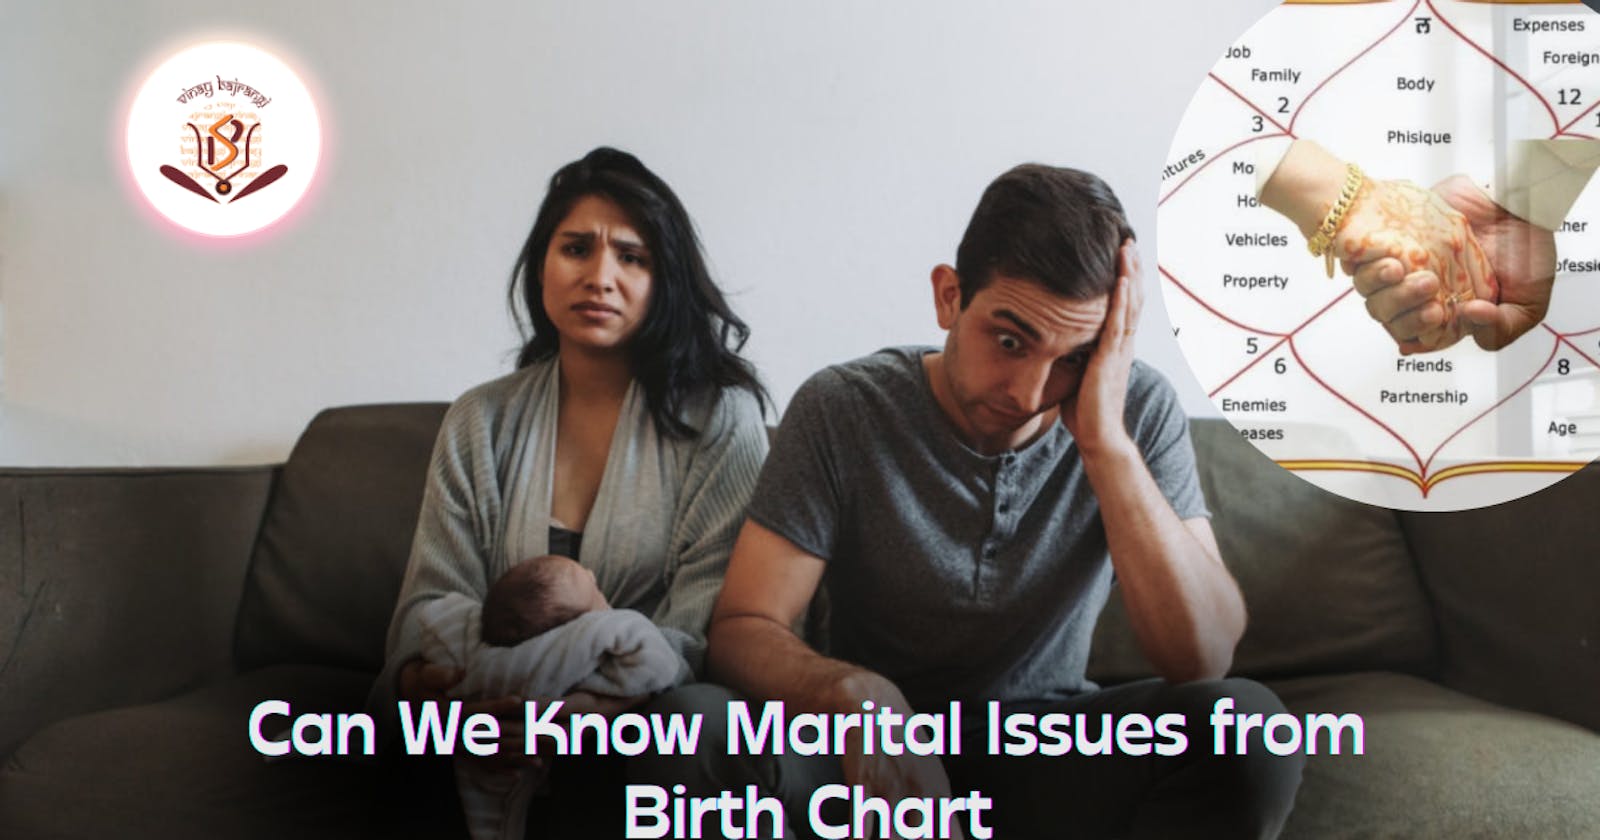 Know Marital Issues from Birth Chart